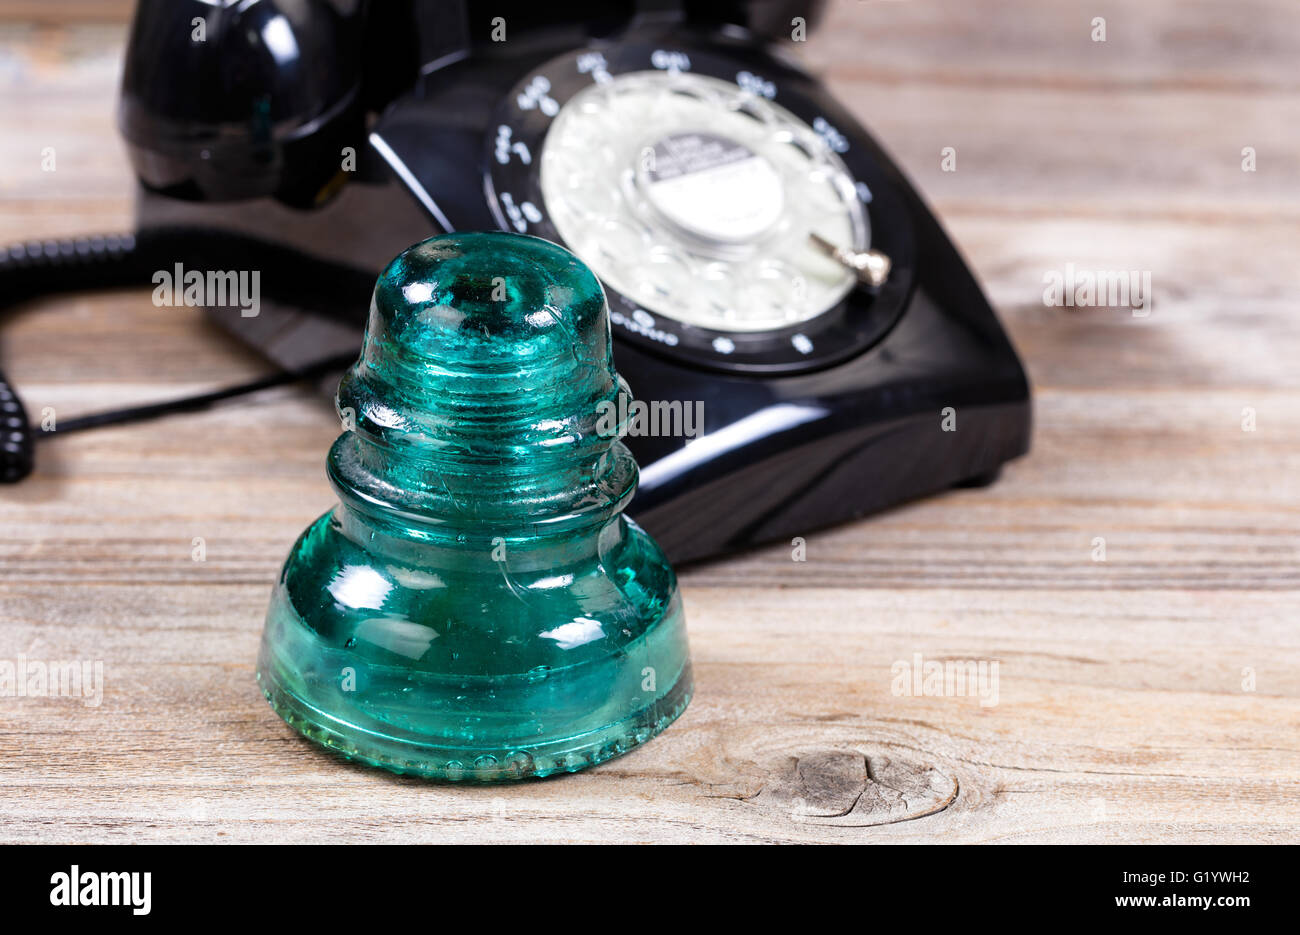 Close up of an antique electric glass insulator with vintage manual dial phone in background. Stock Photo